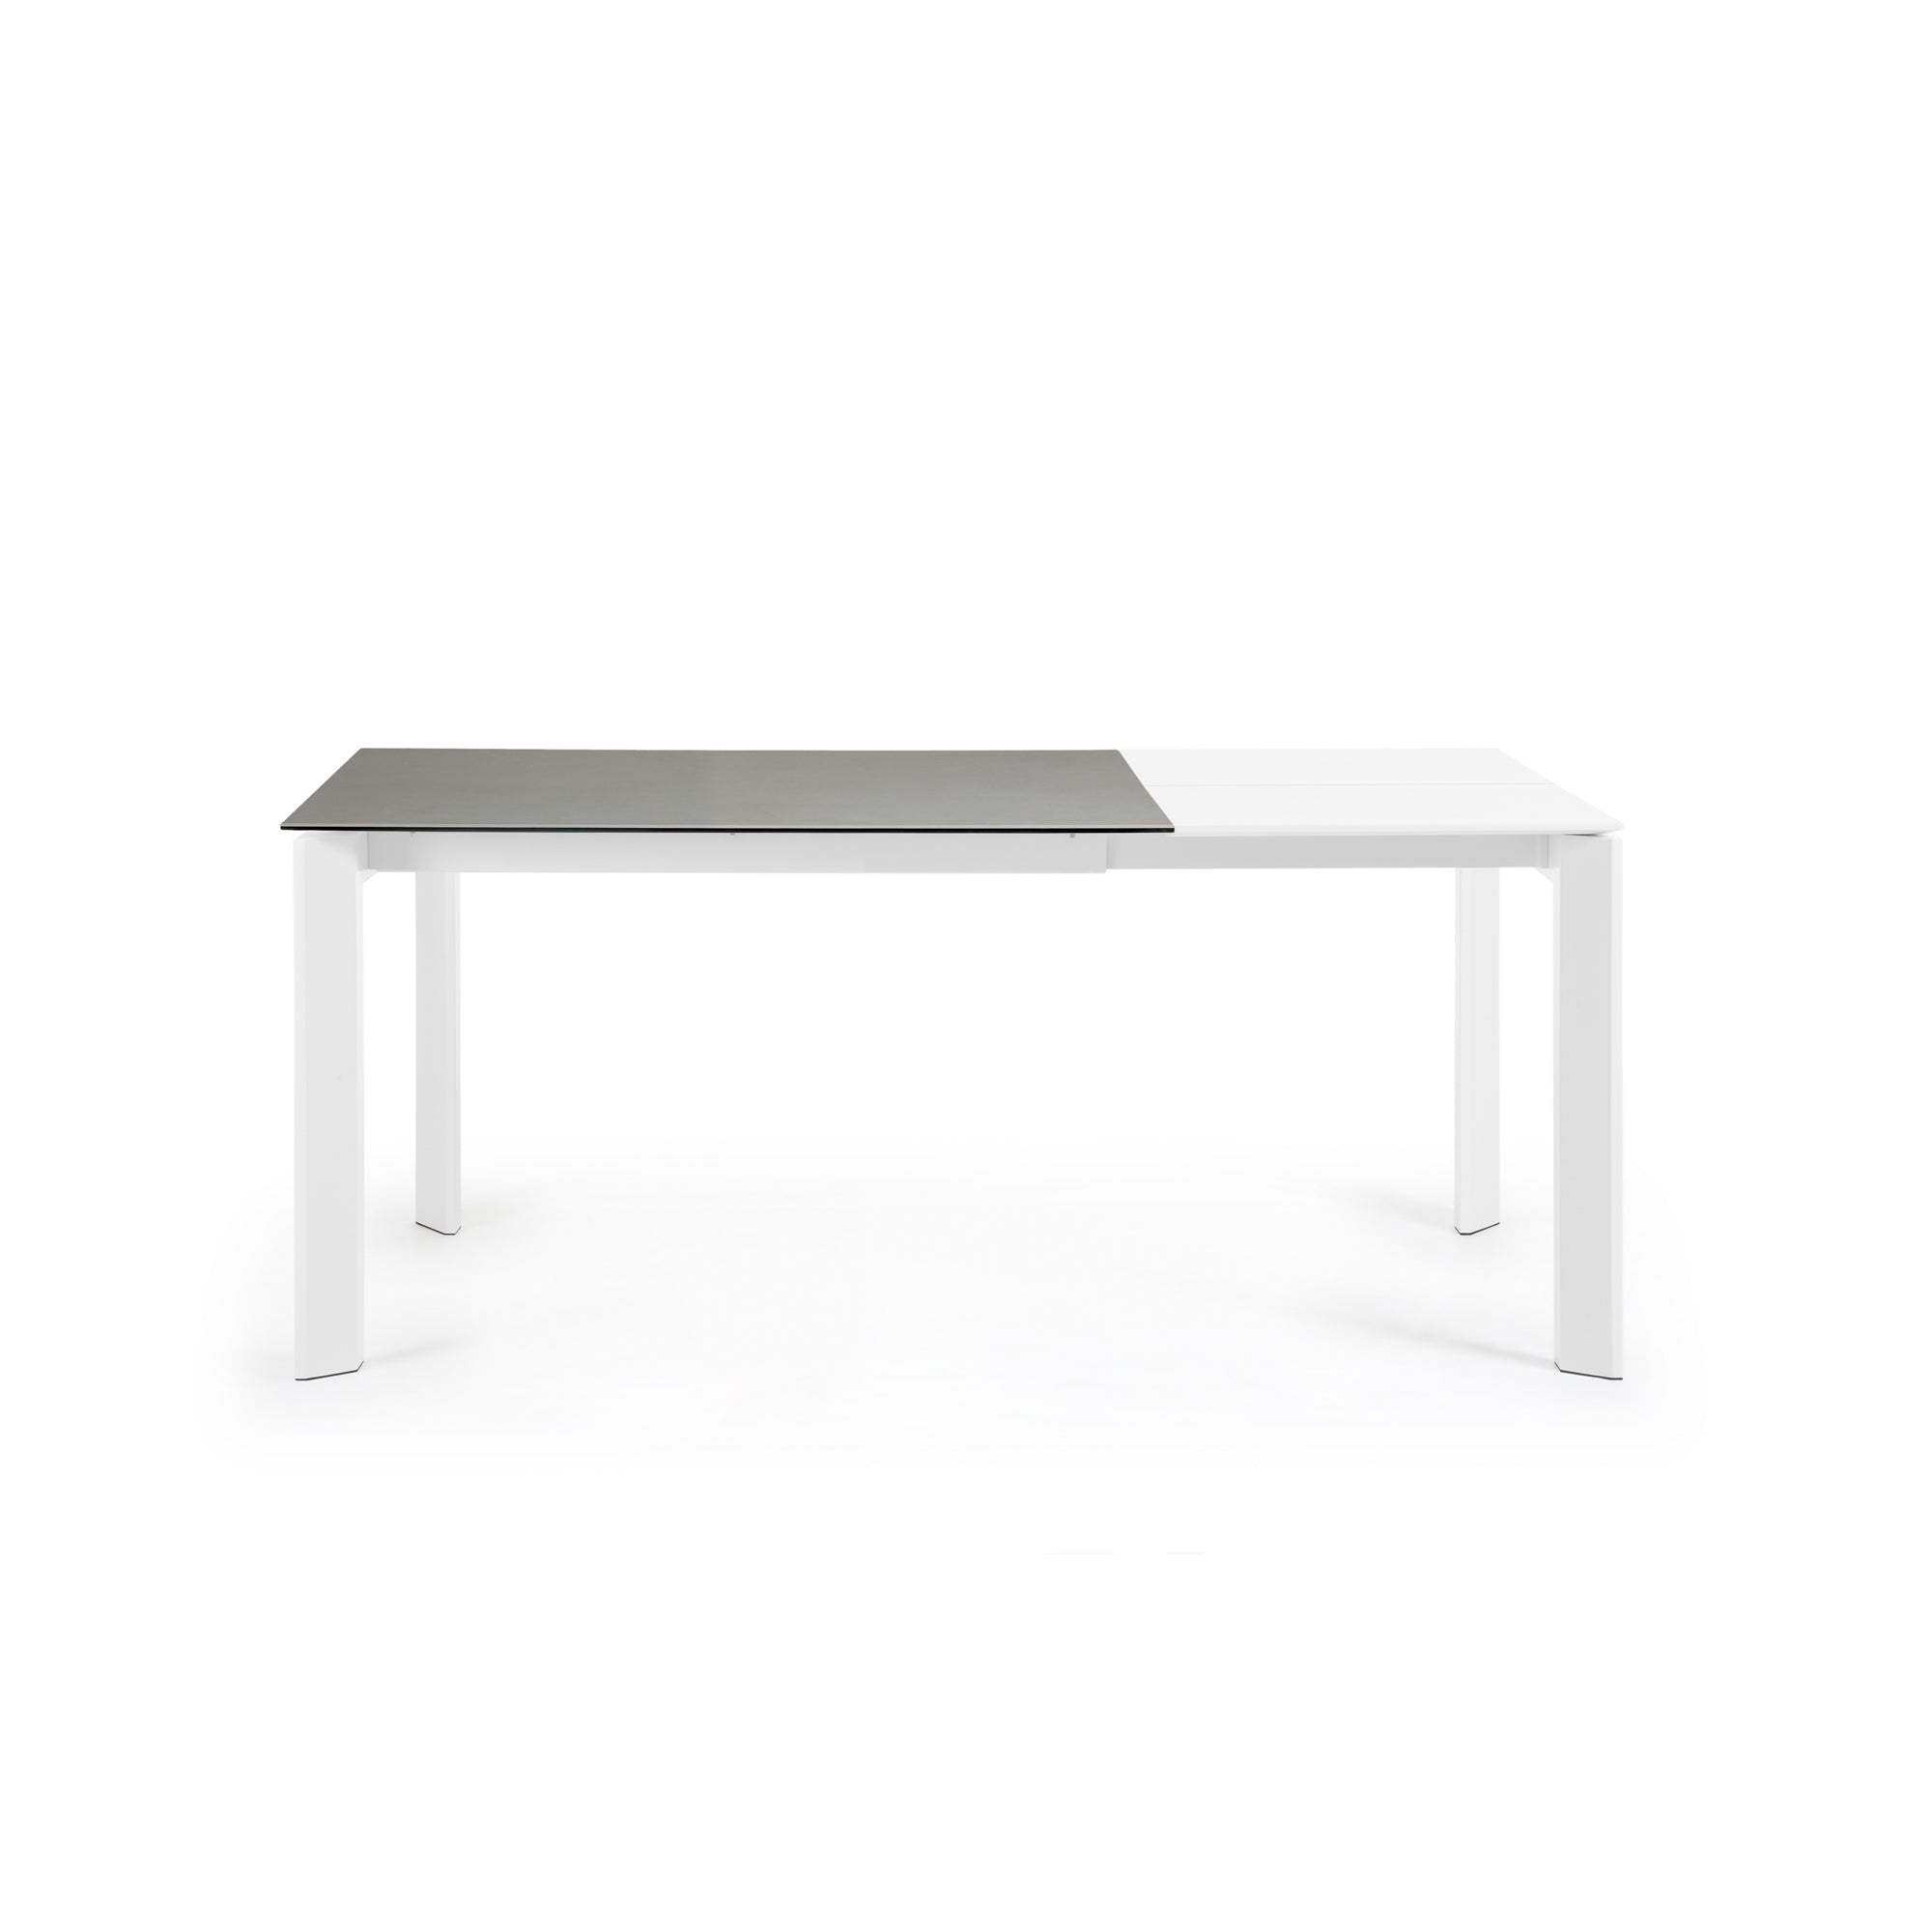 Axis extendable ceramic table with Hydra Plomo finish and white steel legs 120 (180) cm